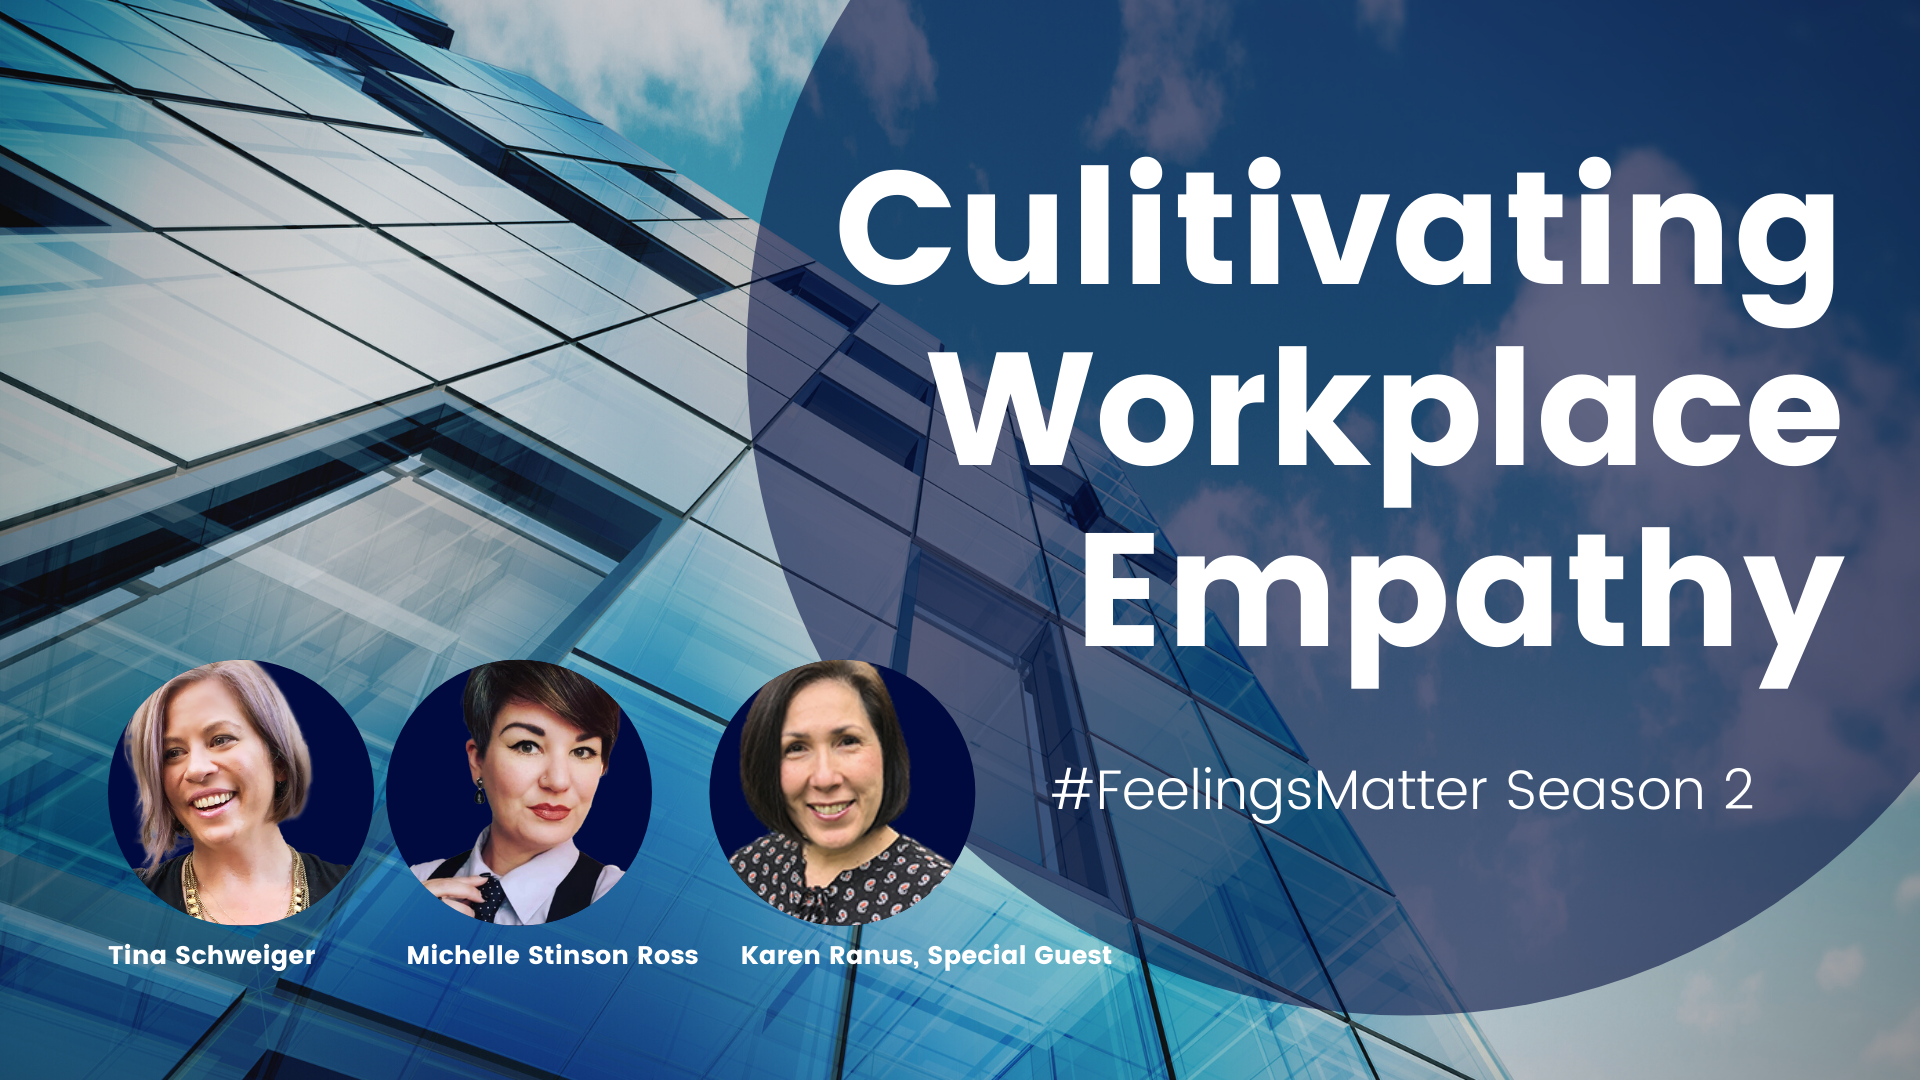 Cultivating Workplace Empathy